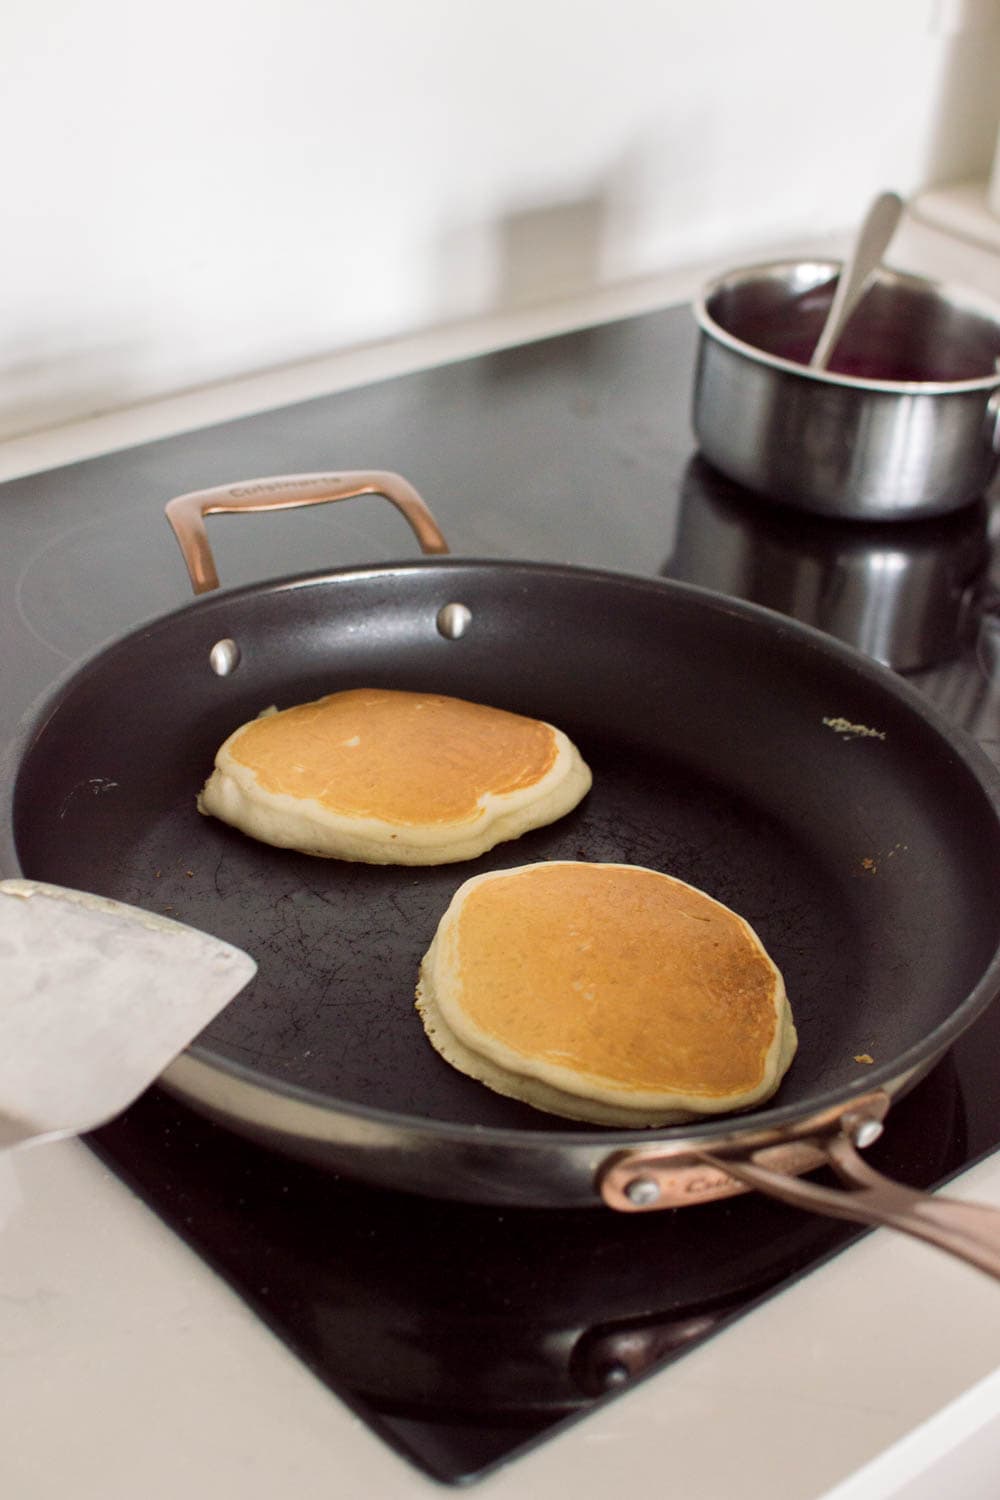 Cooking pancakes in a non-stick skillet